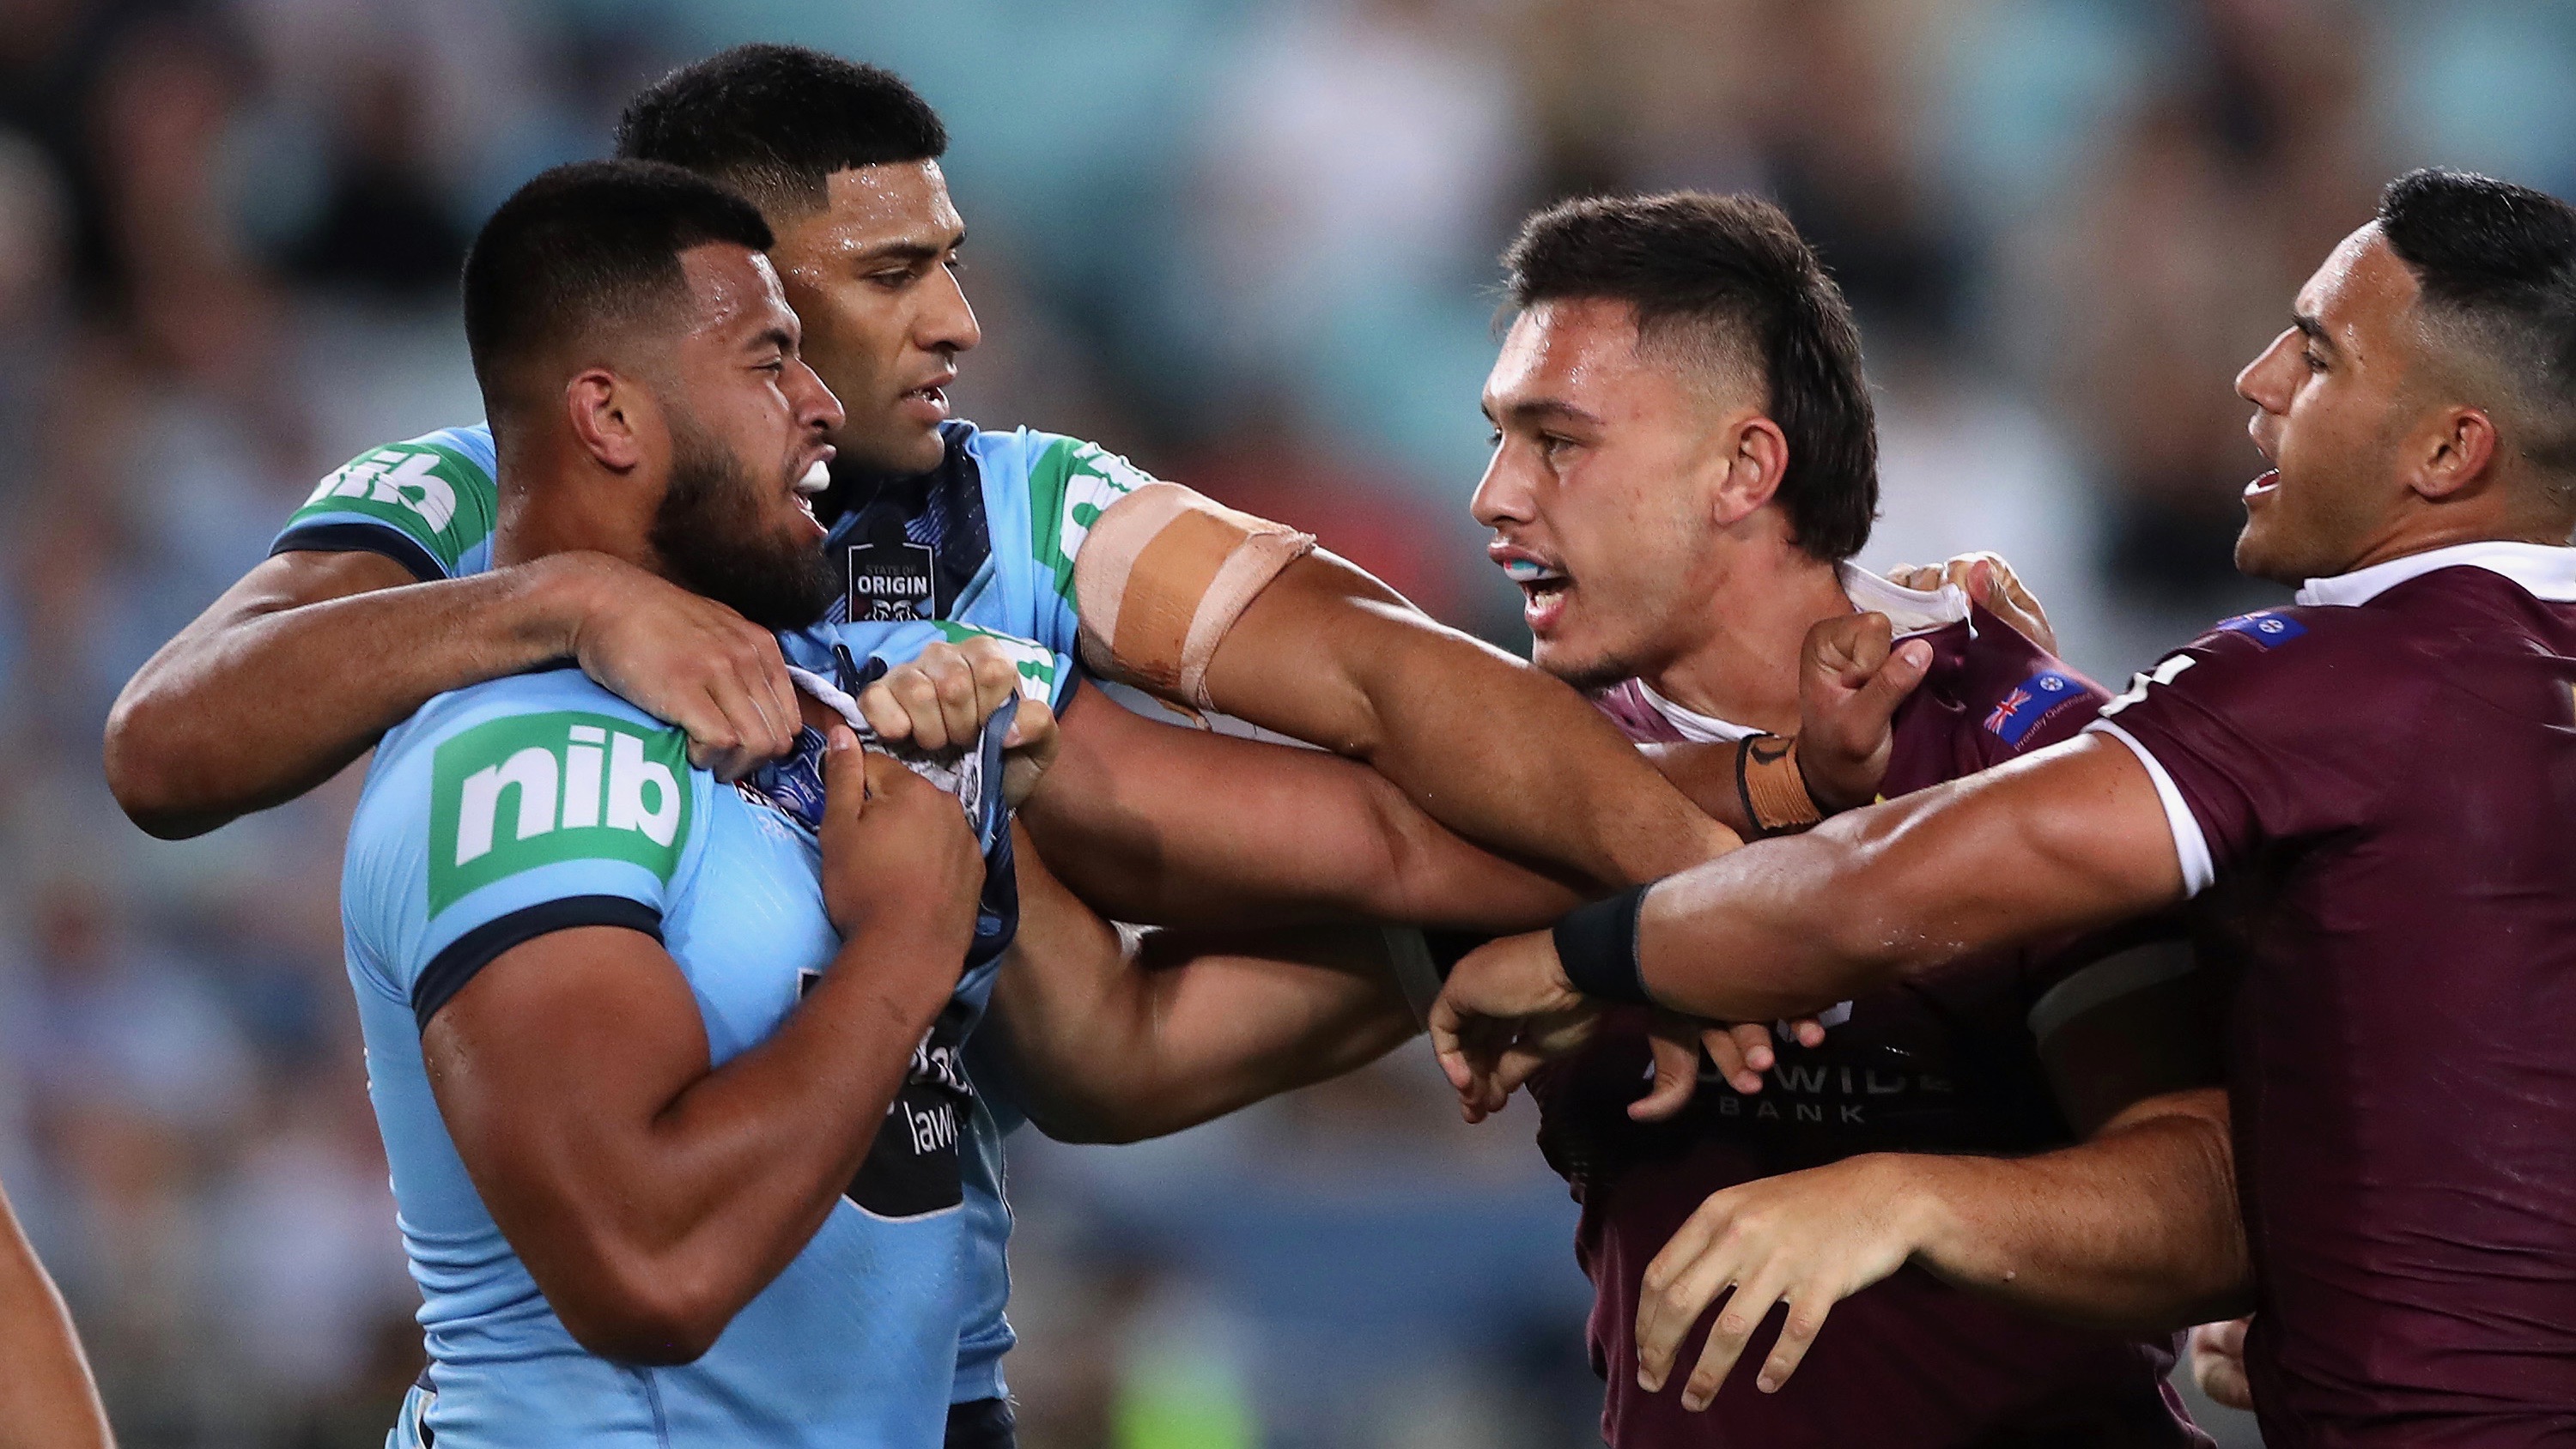 State of Origin 2021 Game 1 live stream NSW Blues vs Qld Maroons from anywhere TechRadar